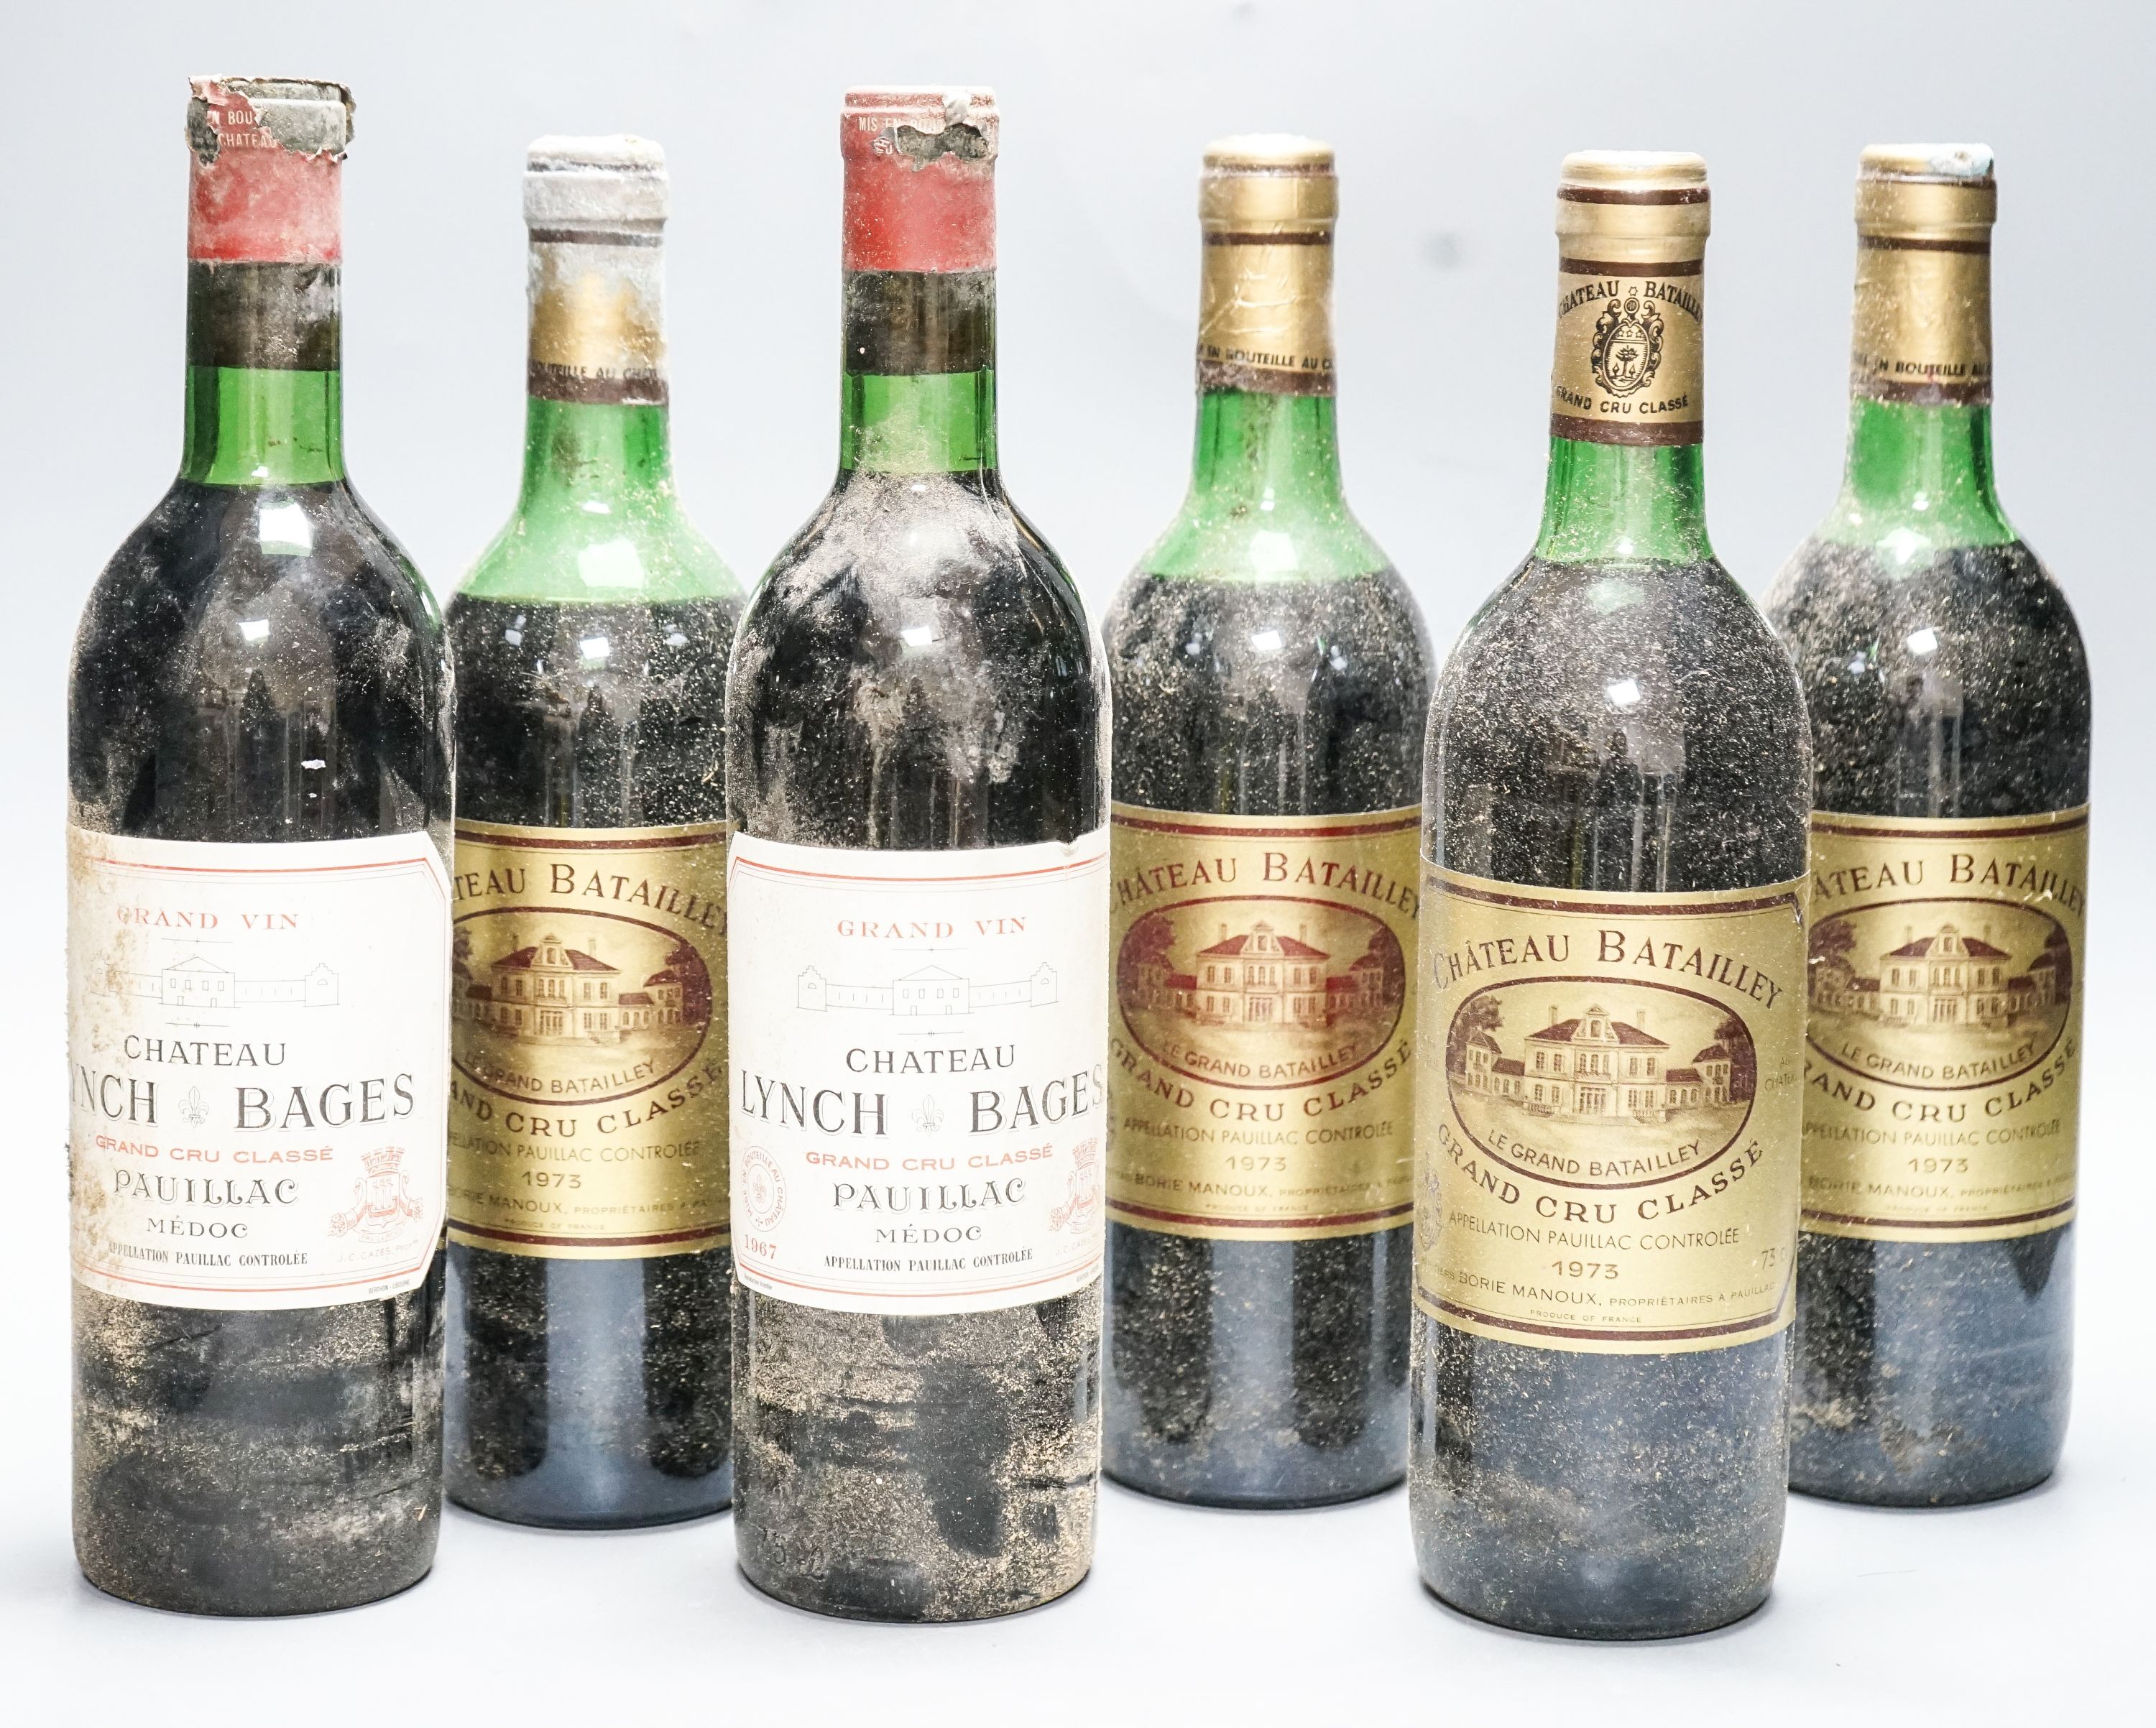 Four bottles of Chateau Batailley grand cru 1973 and 2 bottles of Chateau Lynch Bages 1967